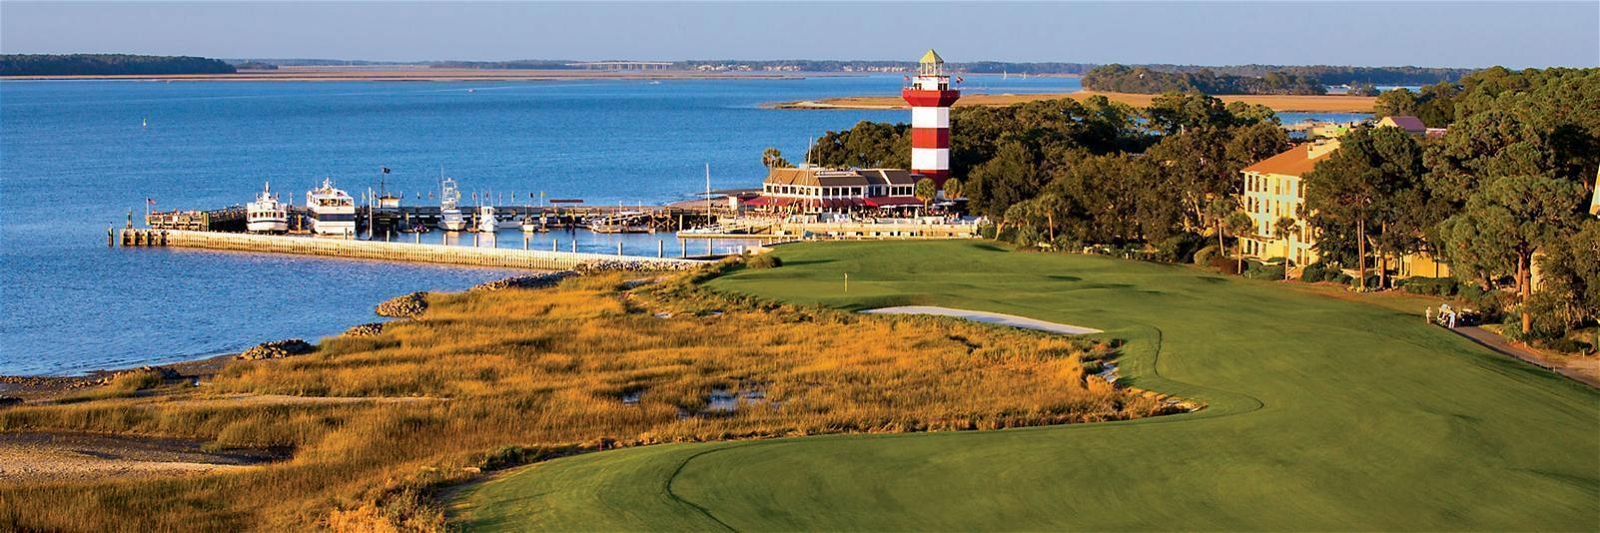 Golf Vacation Package - Harbour Town Golf Links at The Sea Pines Resort